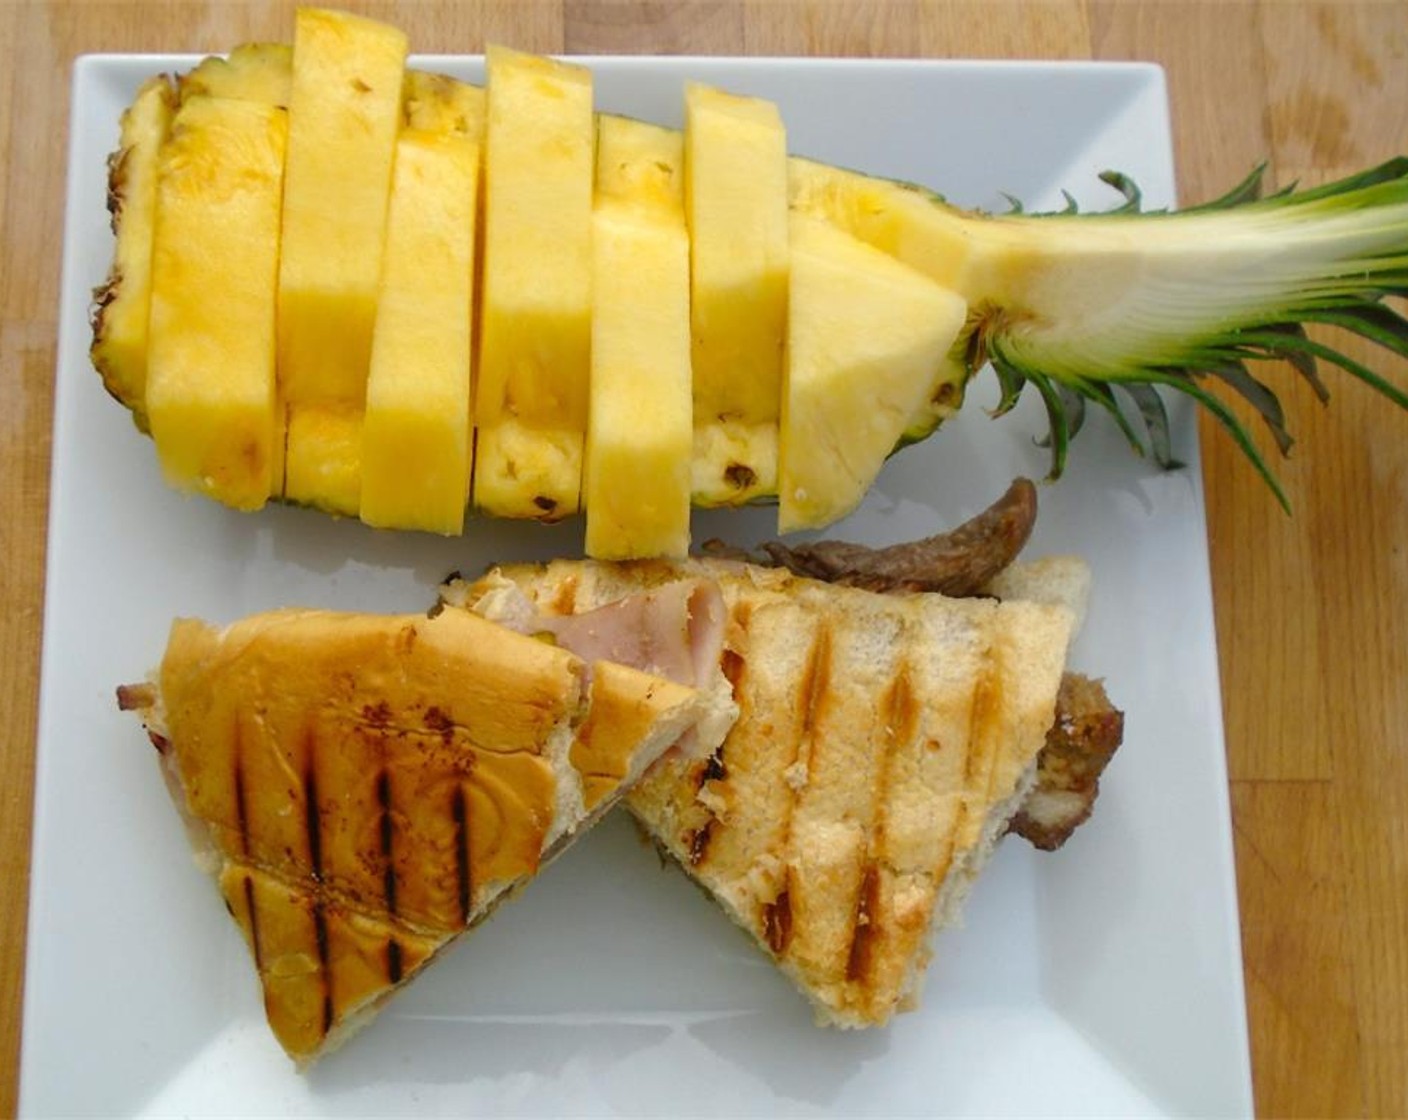 step 10 Serve with a side of french fries and pineapple or mango and Enjoy!